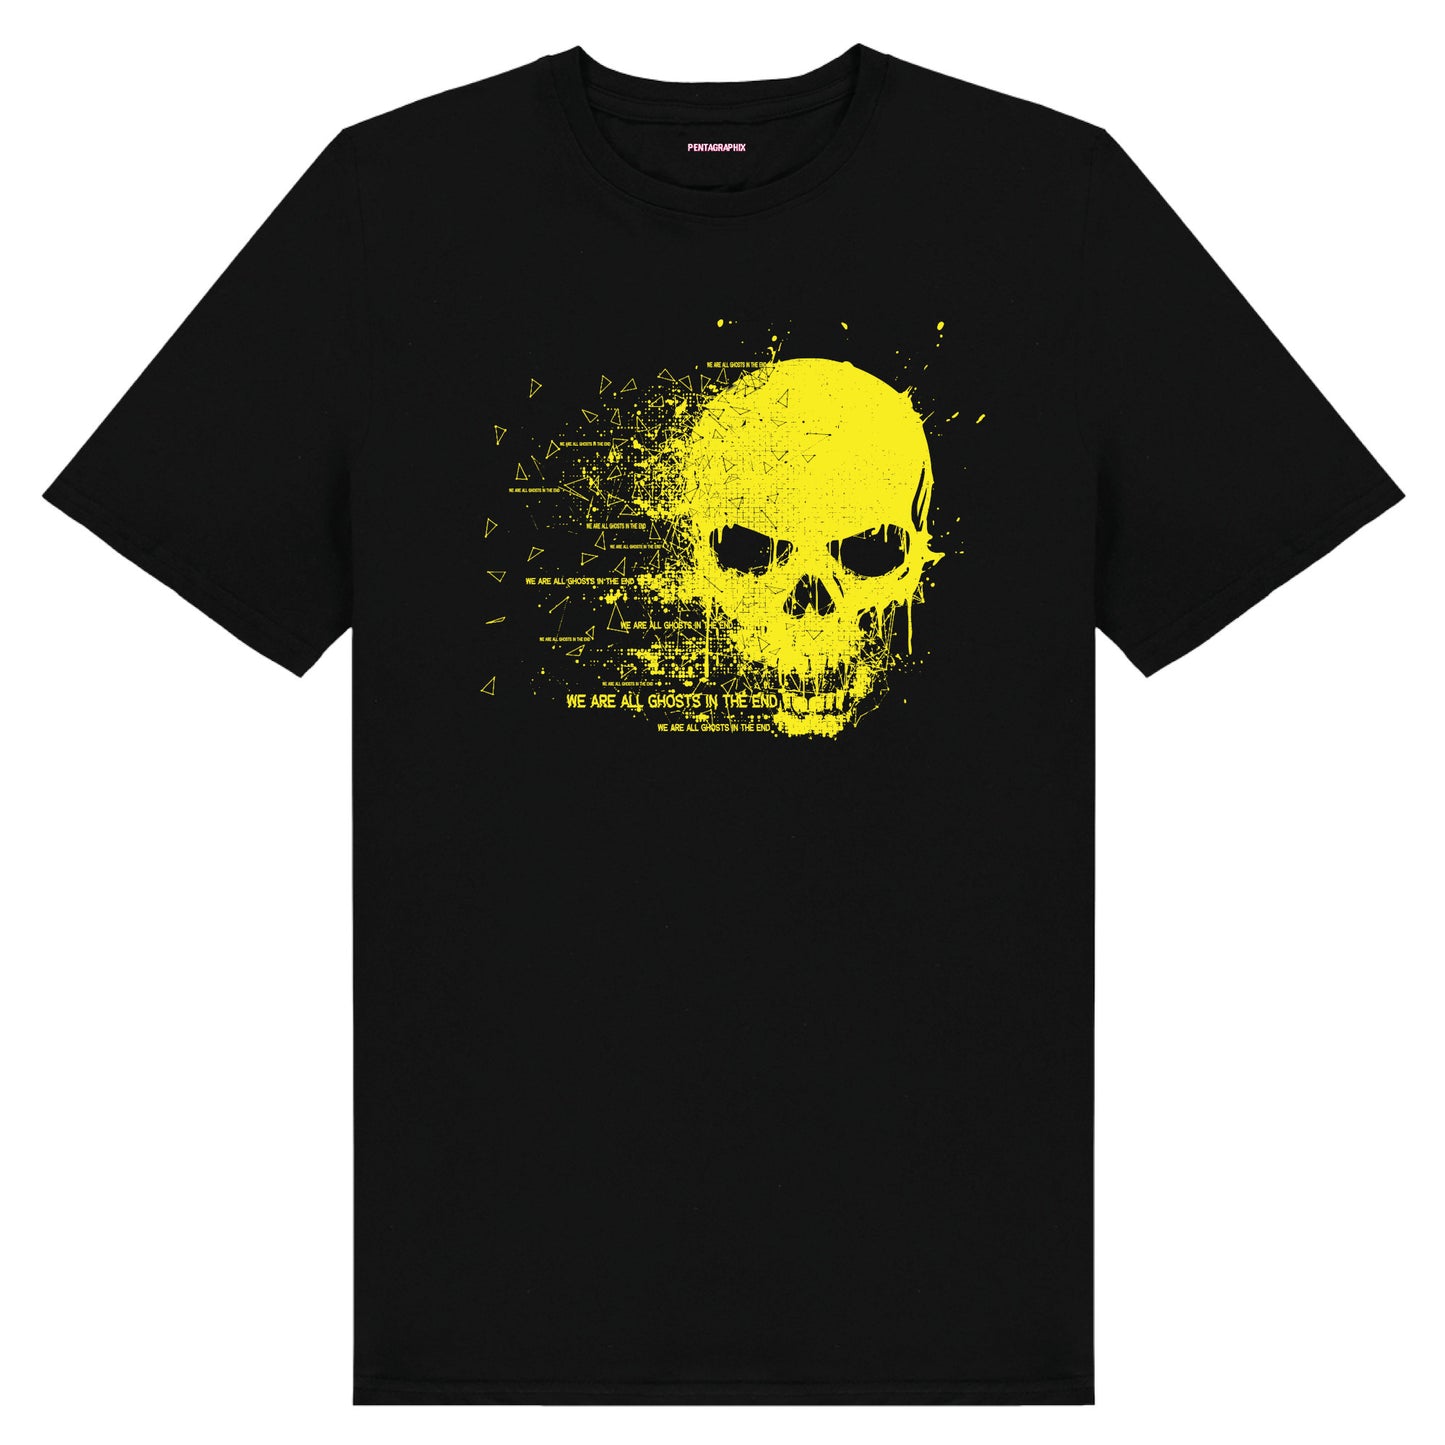 We Are All Ghosts In The End - Digital Decay T-Shirt